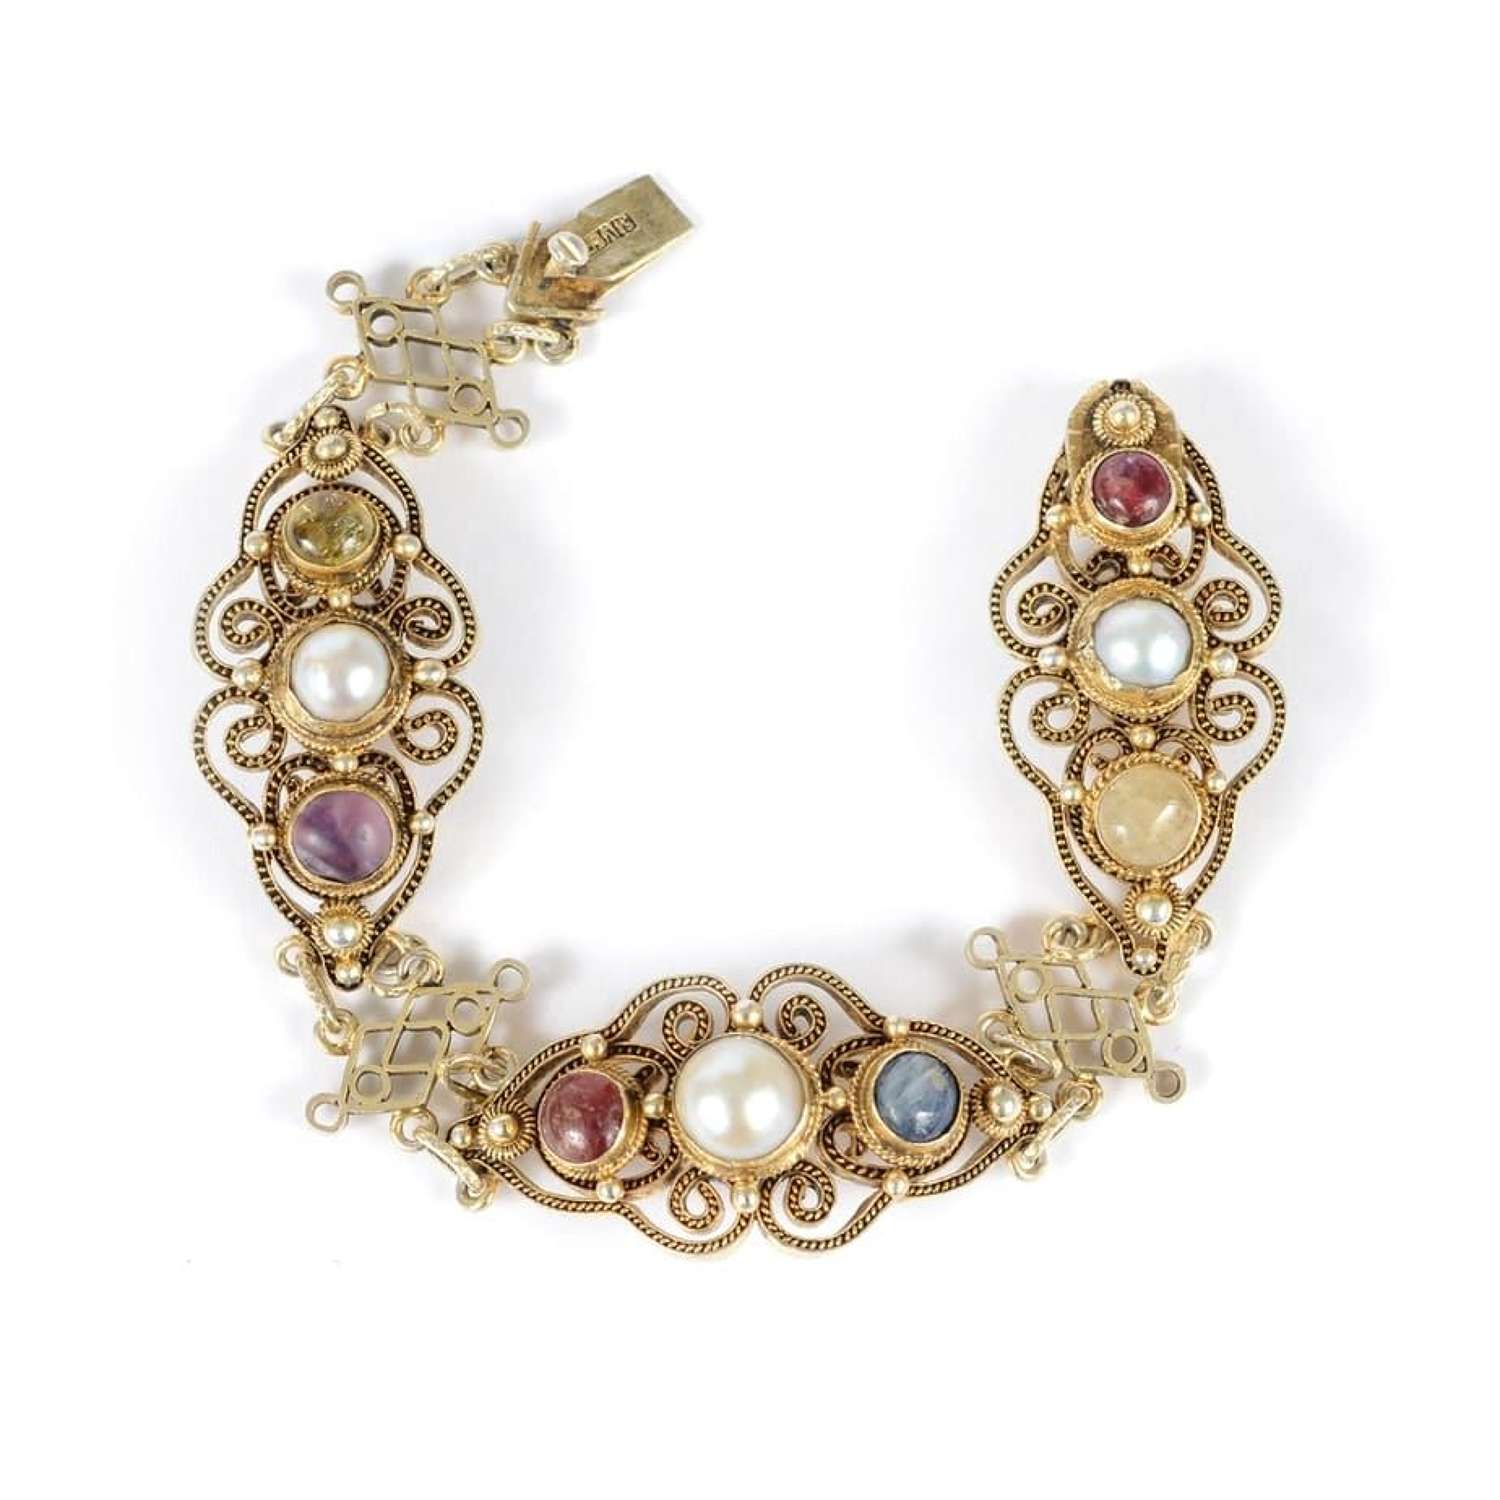 Chinese export silver gilt, natural pearl, sapphire, ruby bracelet